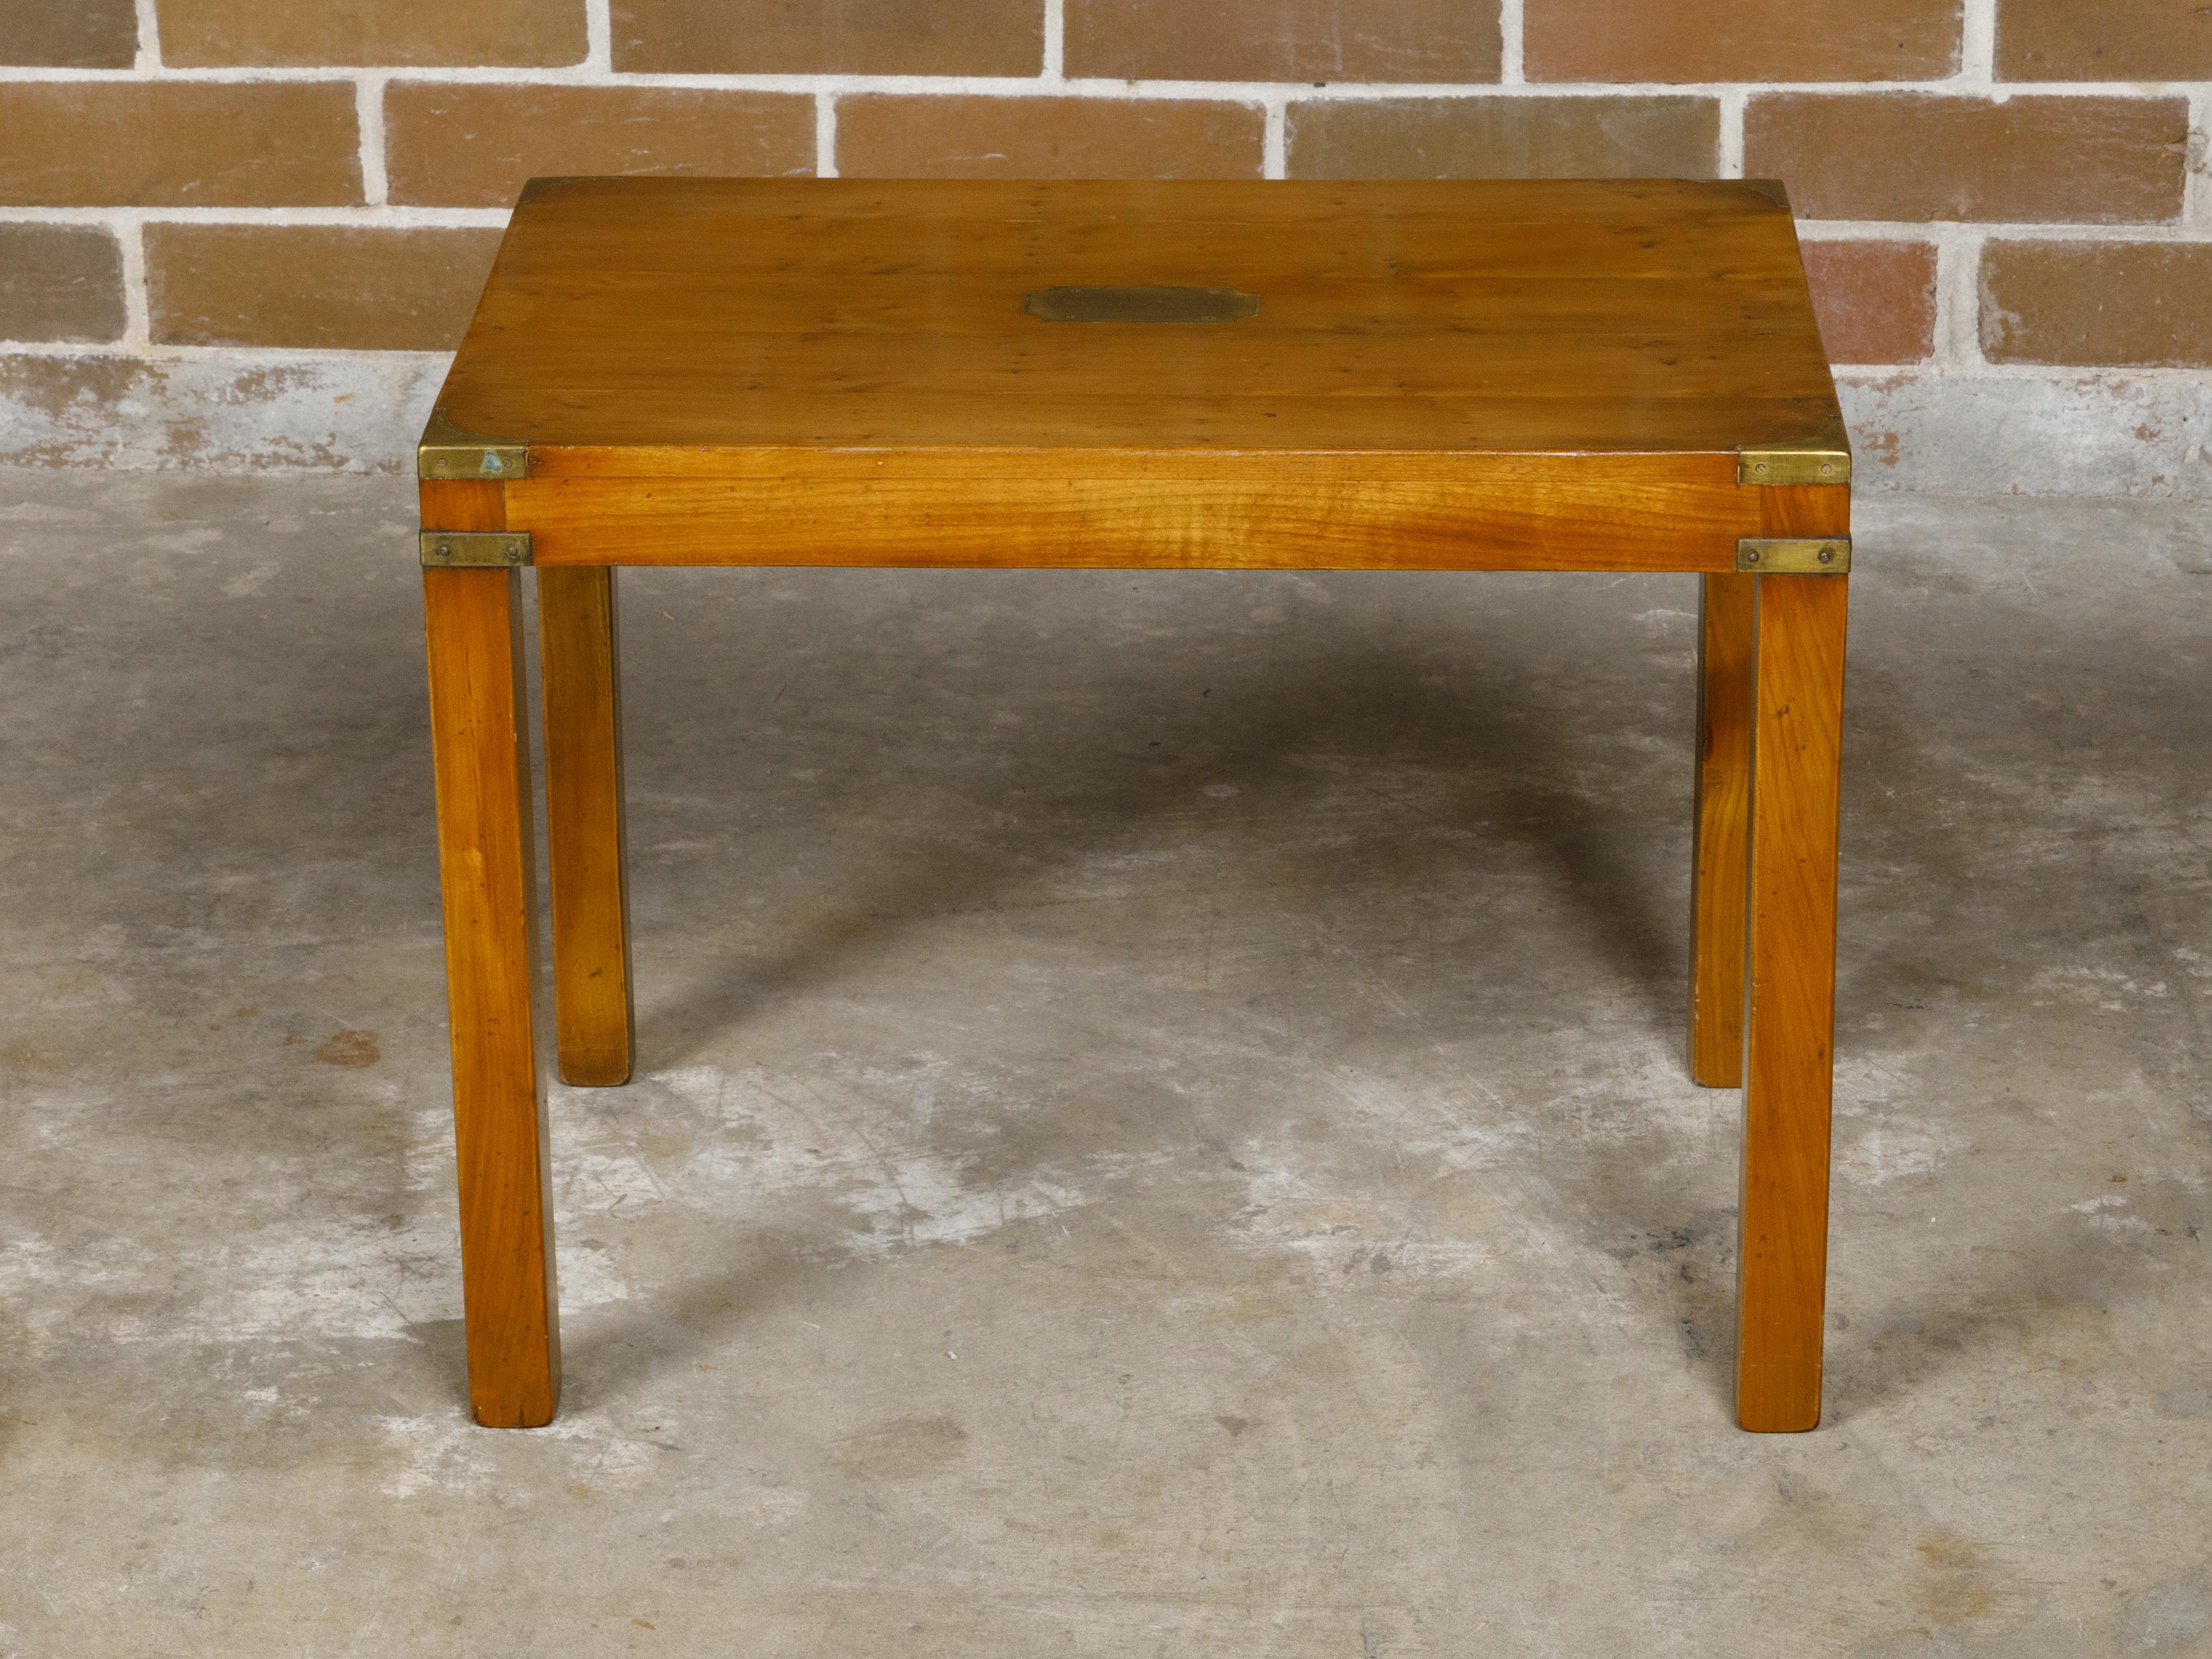 English Campaign Yew Wood 1920s Side Table with Brass Accents and Straight Legs For Sale 6